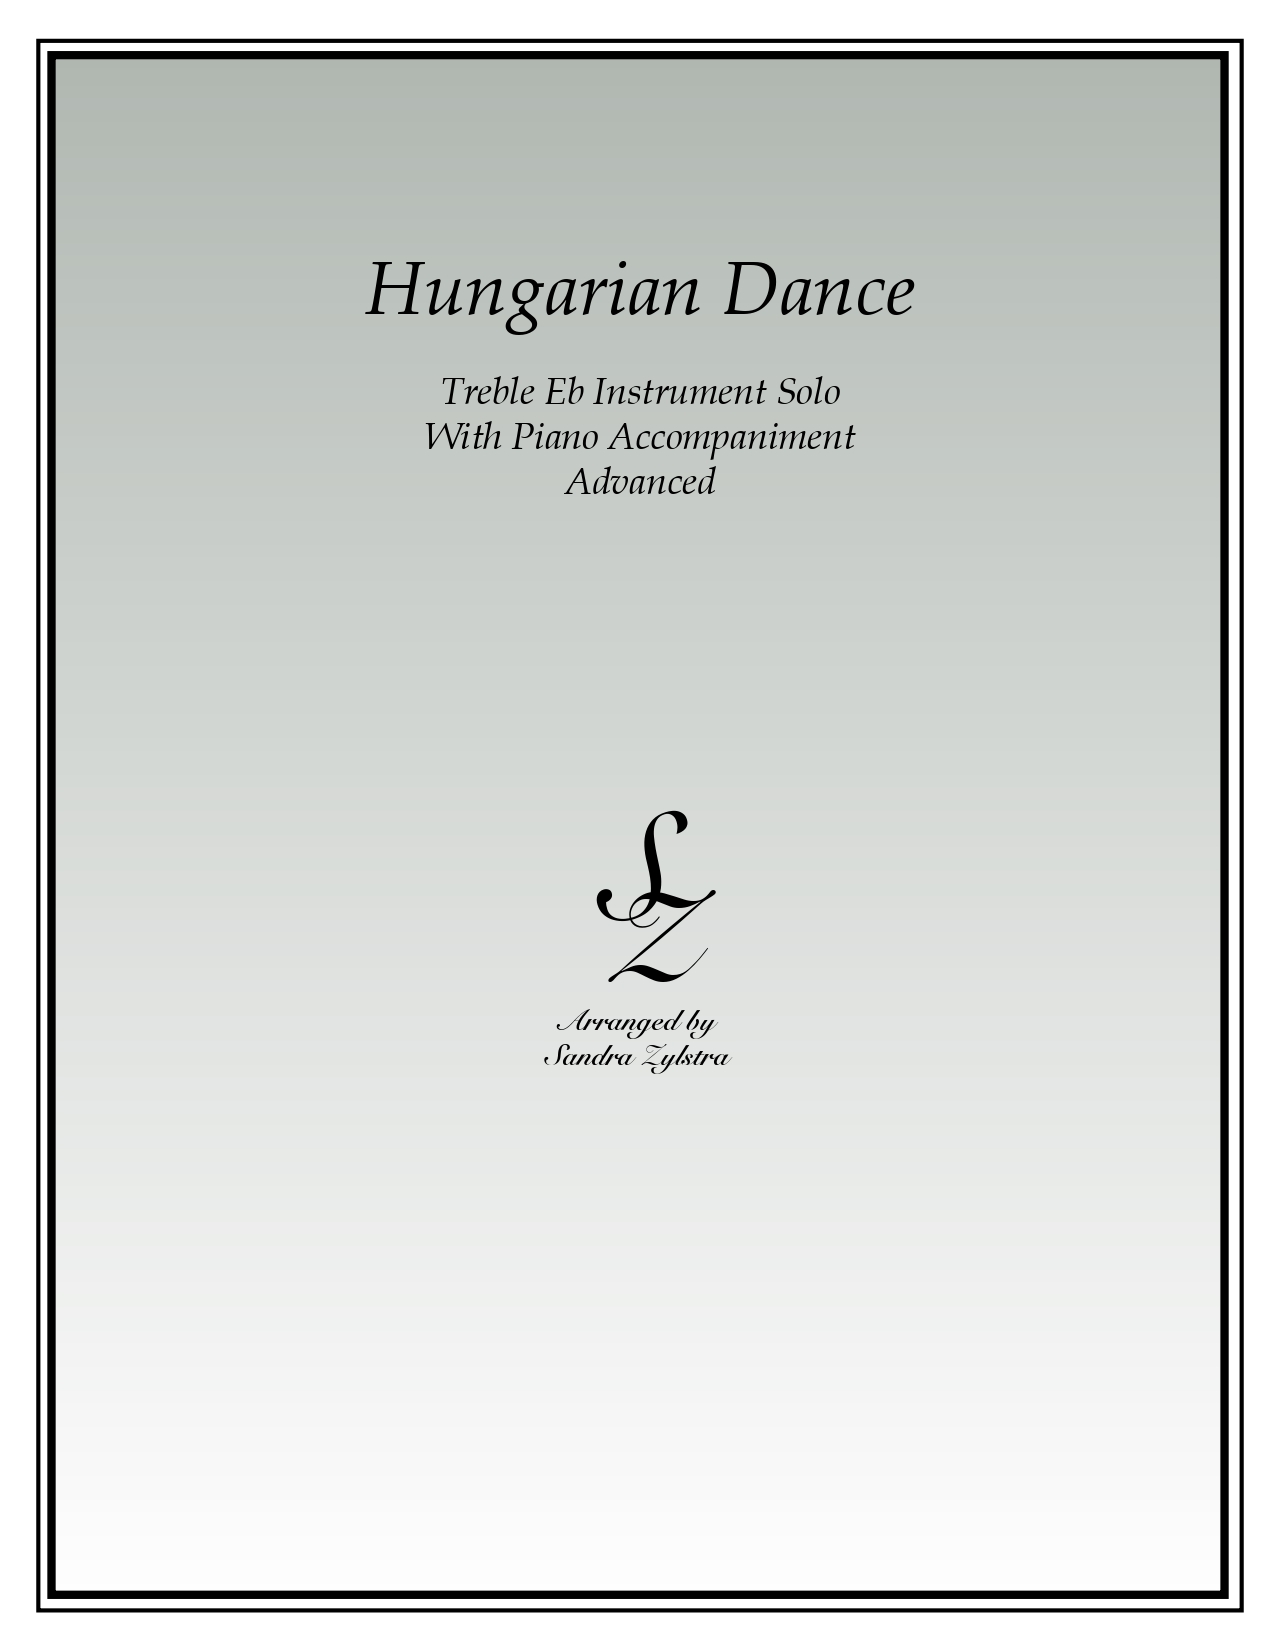 Hungarian Dance Eb instrument solo part cover page 00011